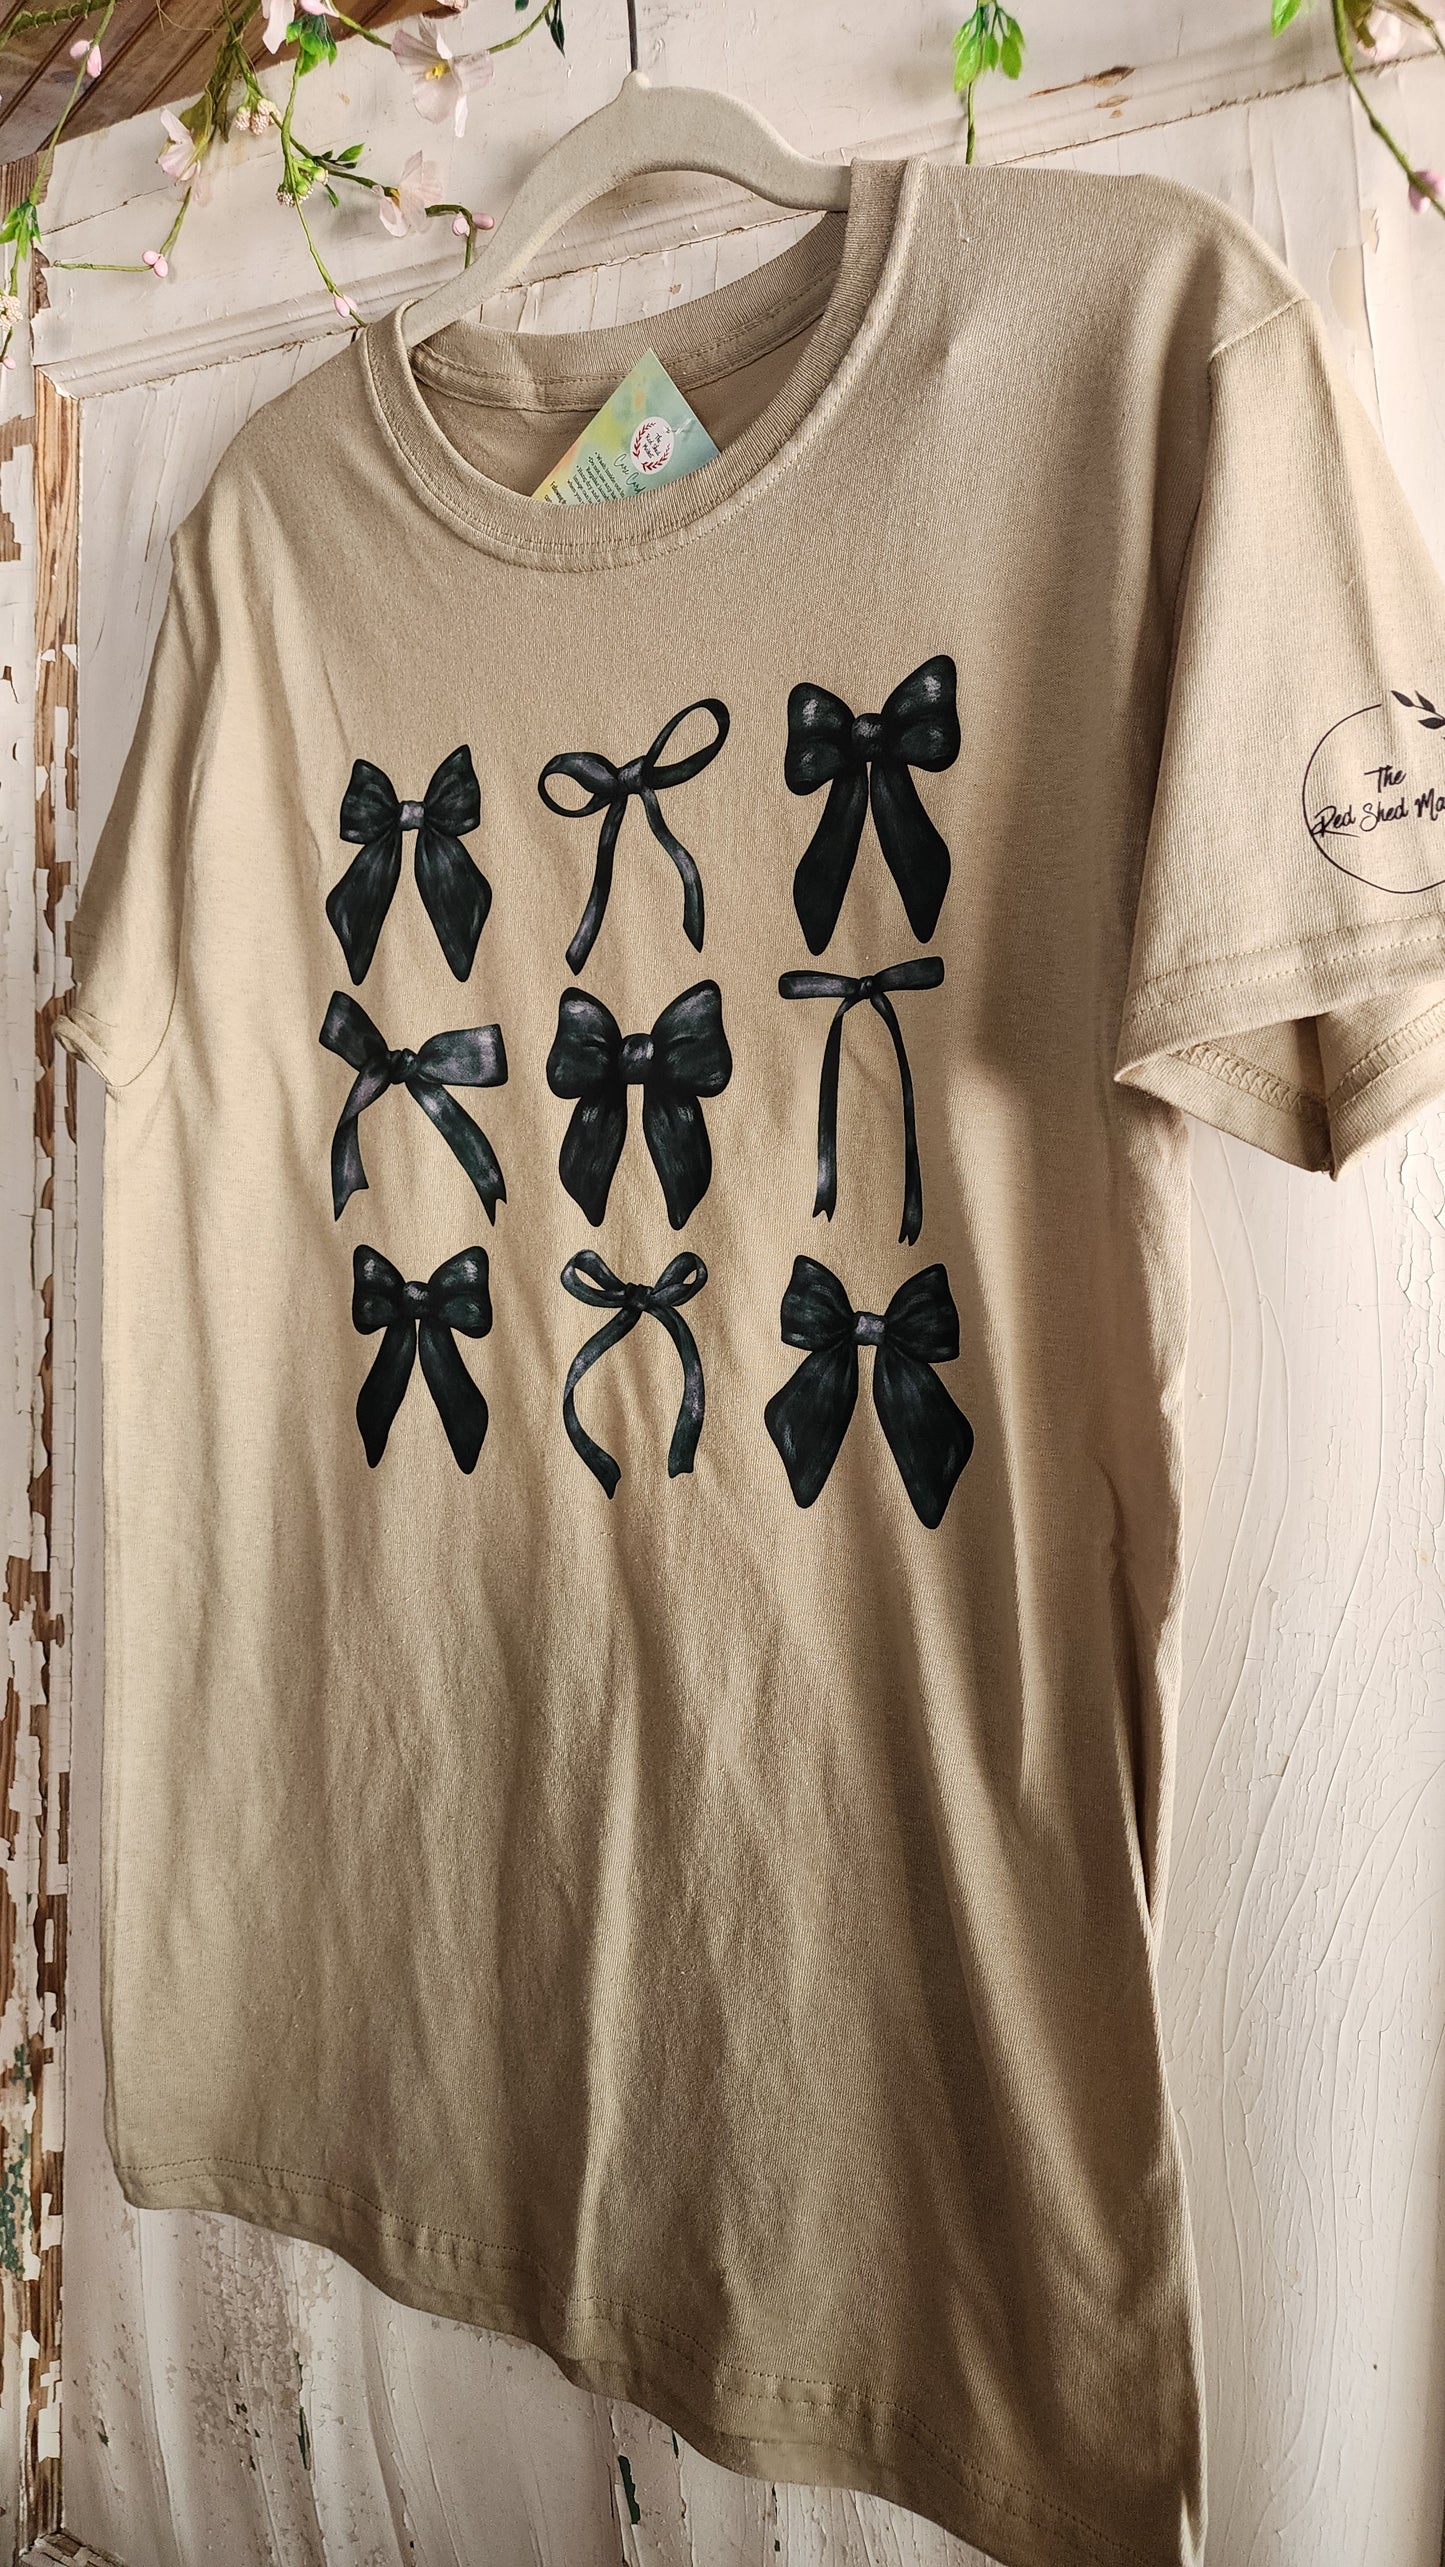 Croquet Bows In Black On Light Weight Tan Tee